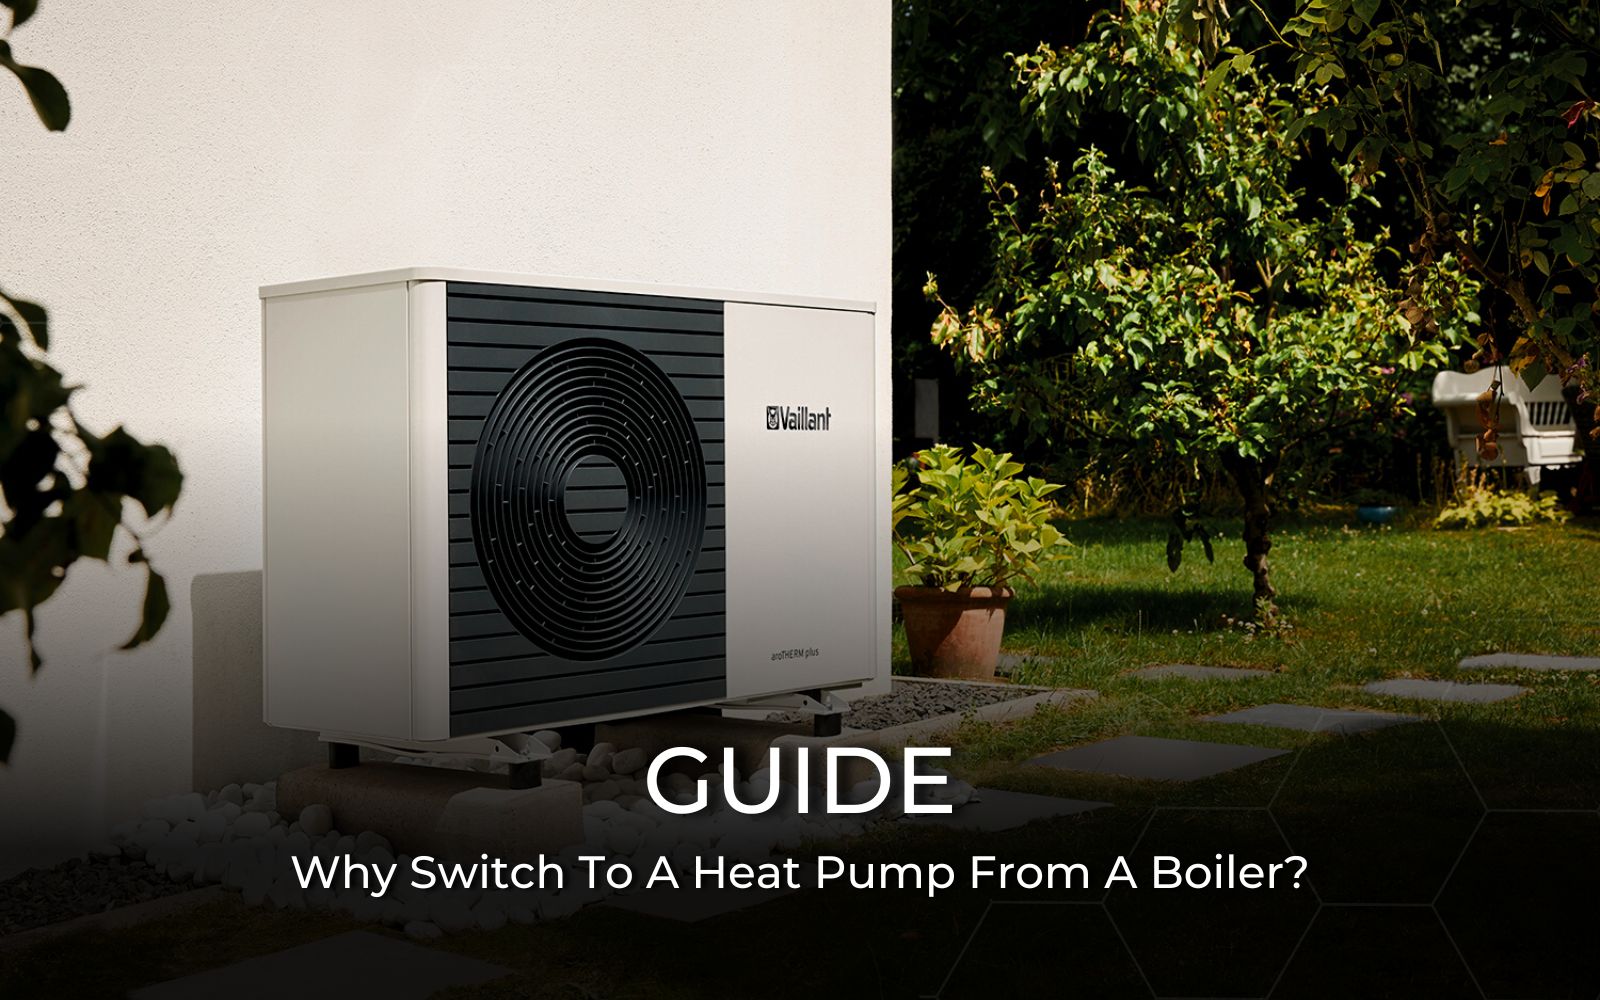 Why Switch To A Heat Pump